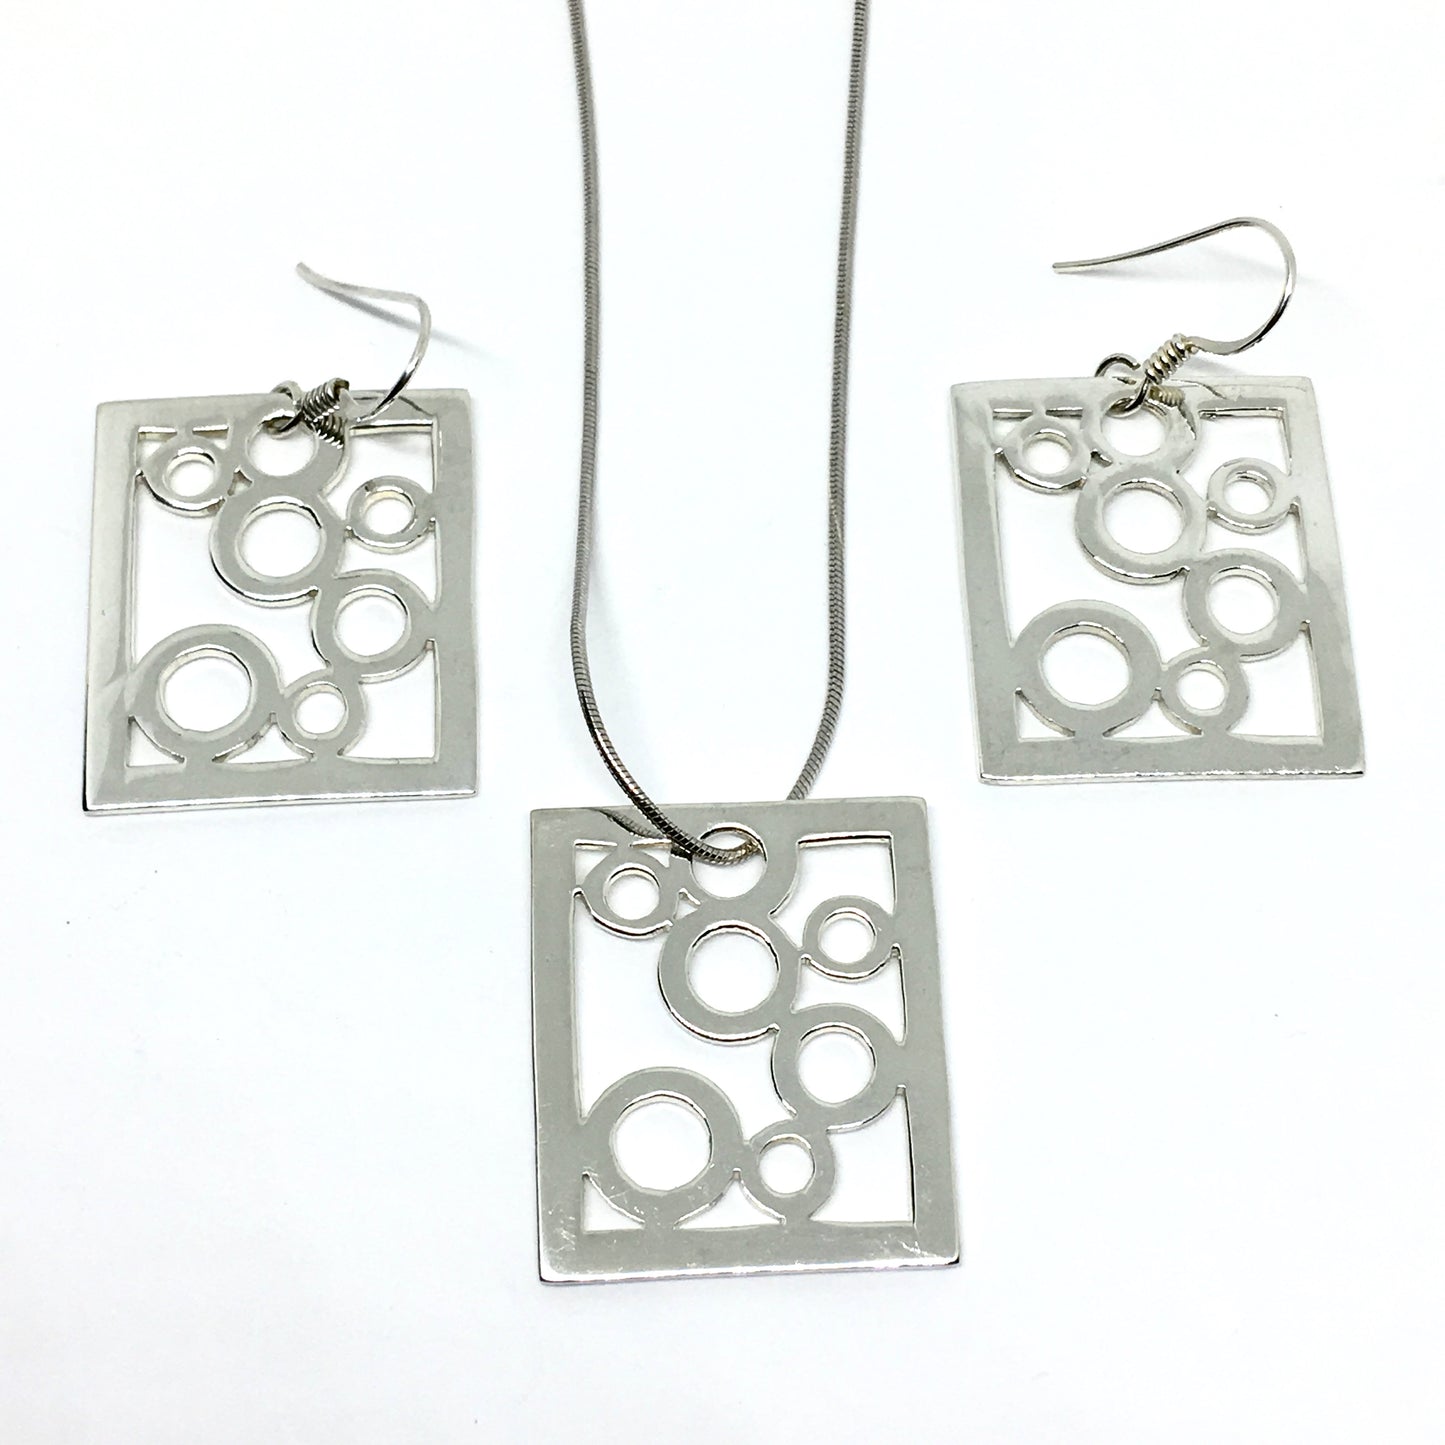 Pendant Necklace & Earrings Matching set - Sterling Silver Artsy Chic Modernist Style Circle Design Jewelry